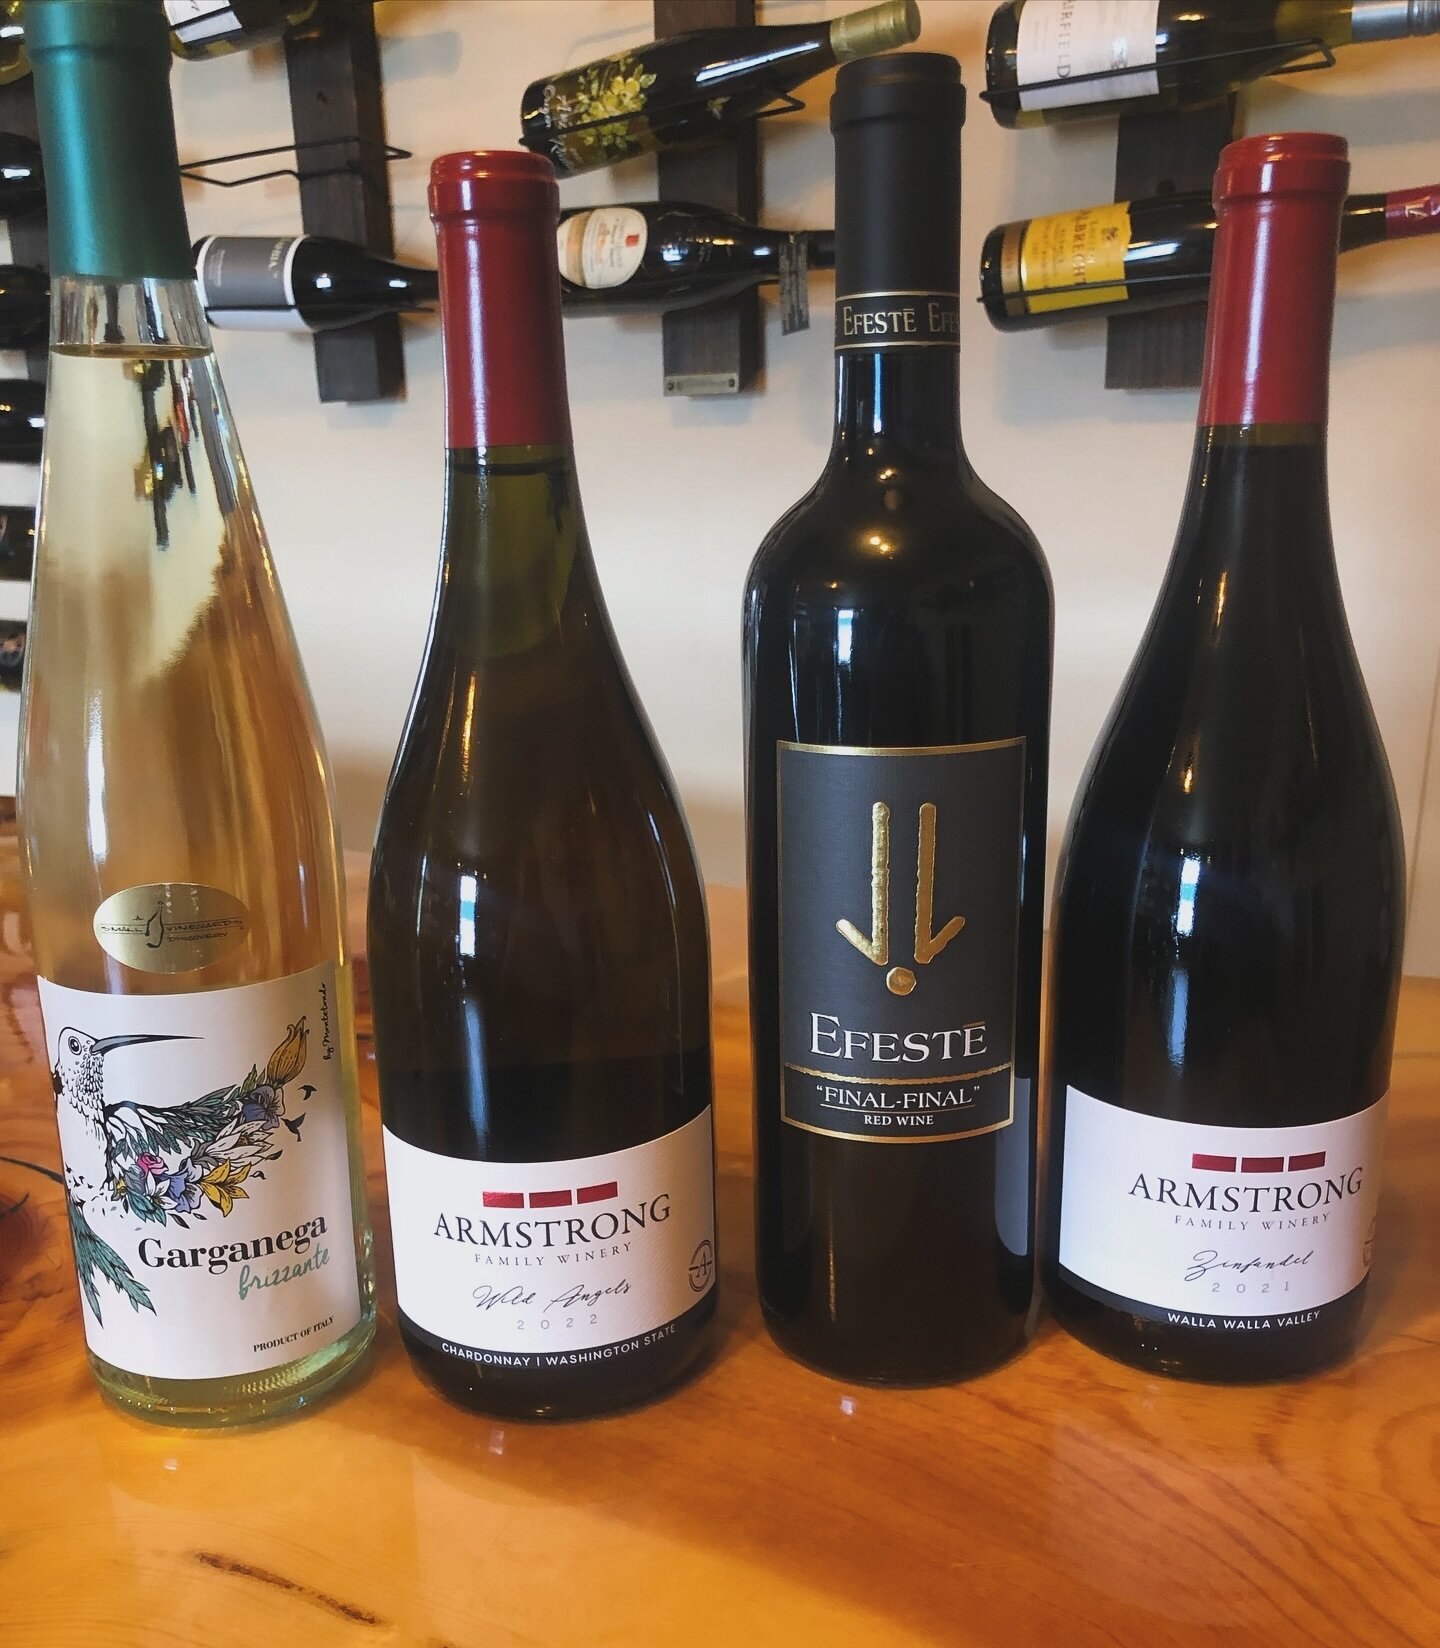 This weeks #winewednesday lineup is here!🎉 We will have Ruth, from Armstrong winery, joining in on the fun as we showcase their Chardonnay and Zinfandel. See you Wednesday from 4-7 in the wine room🍷🥩🤍